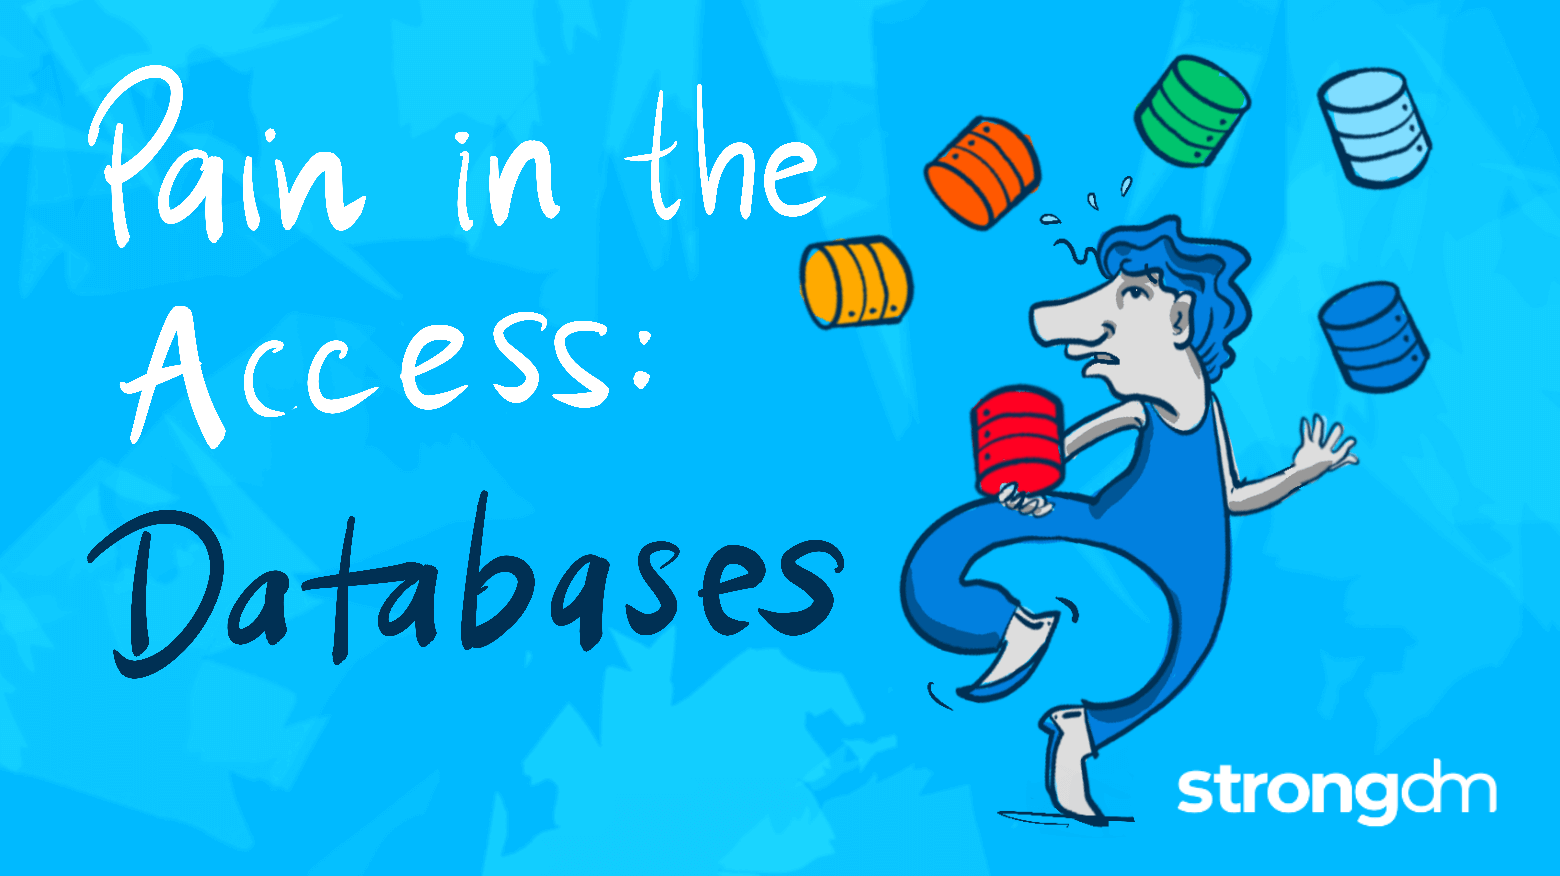 Pain in the Access: Databases